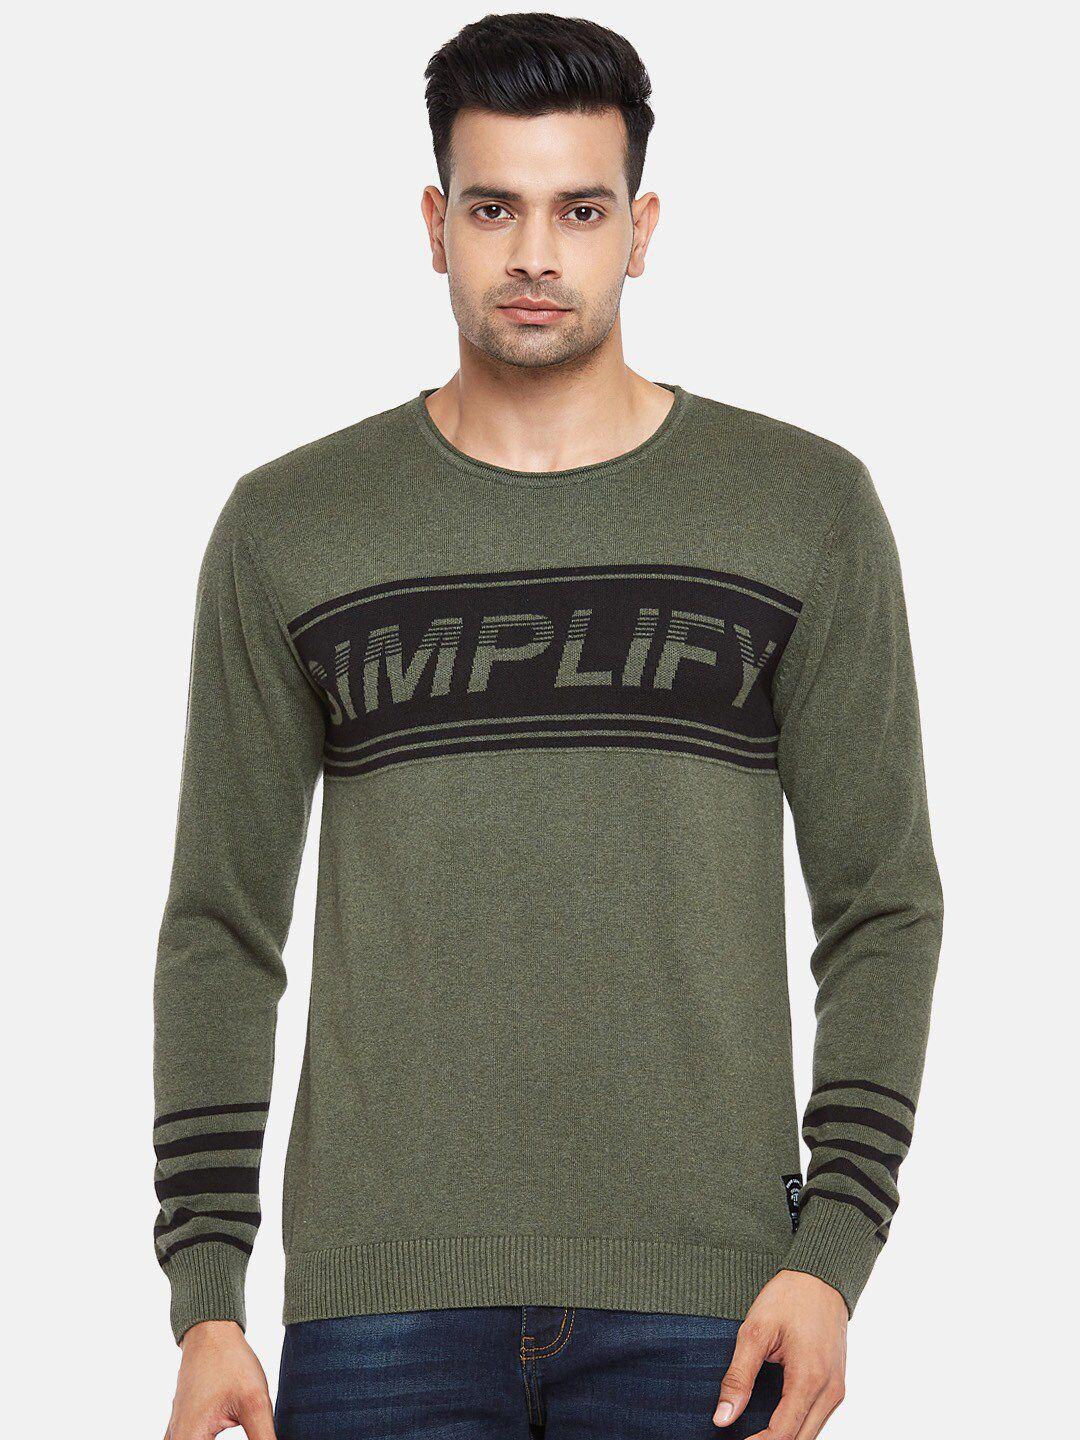 people-men-olive-green-&-black-typography-printed-pure-cotton-pullover